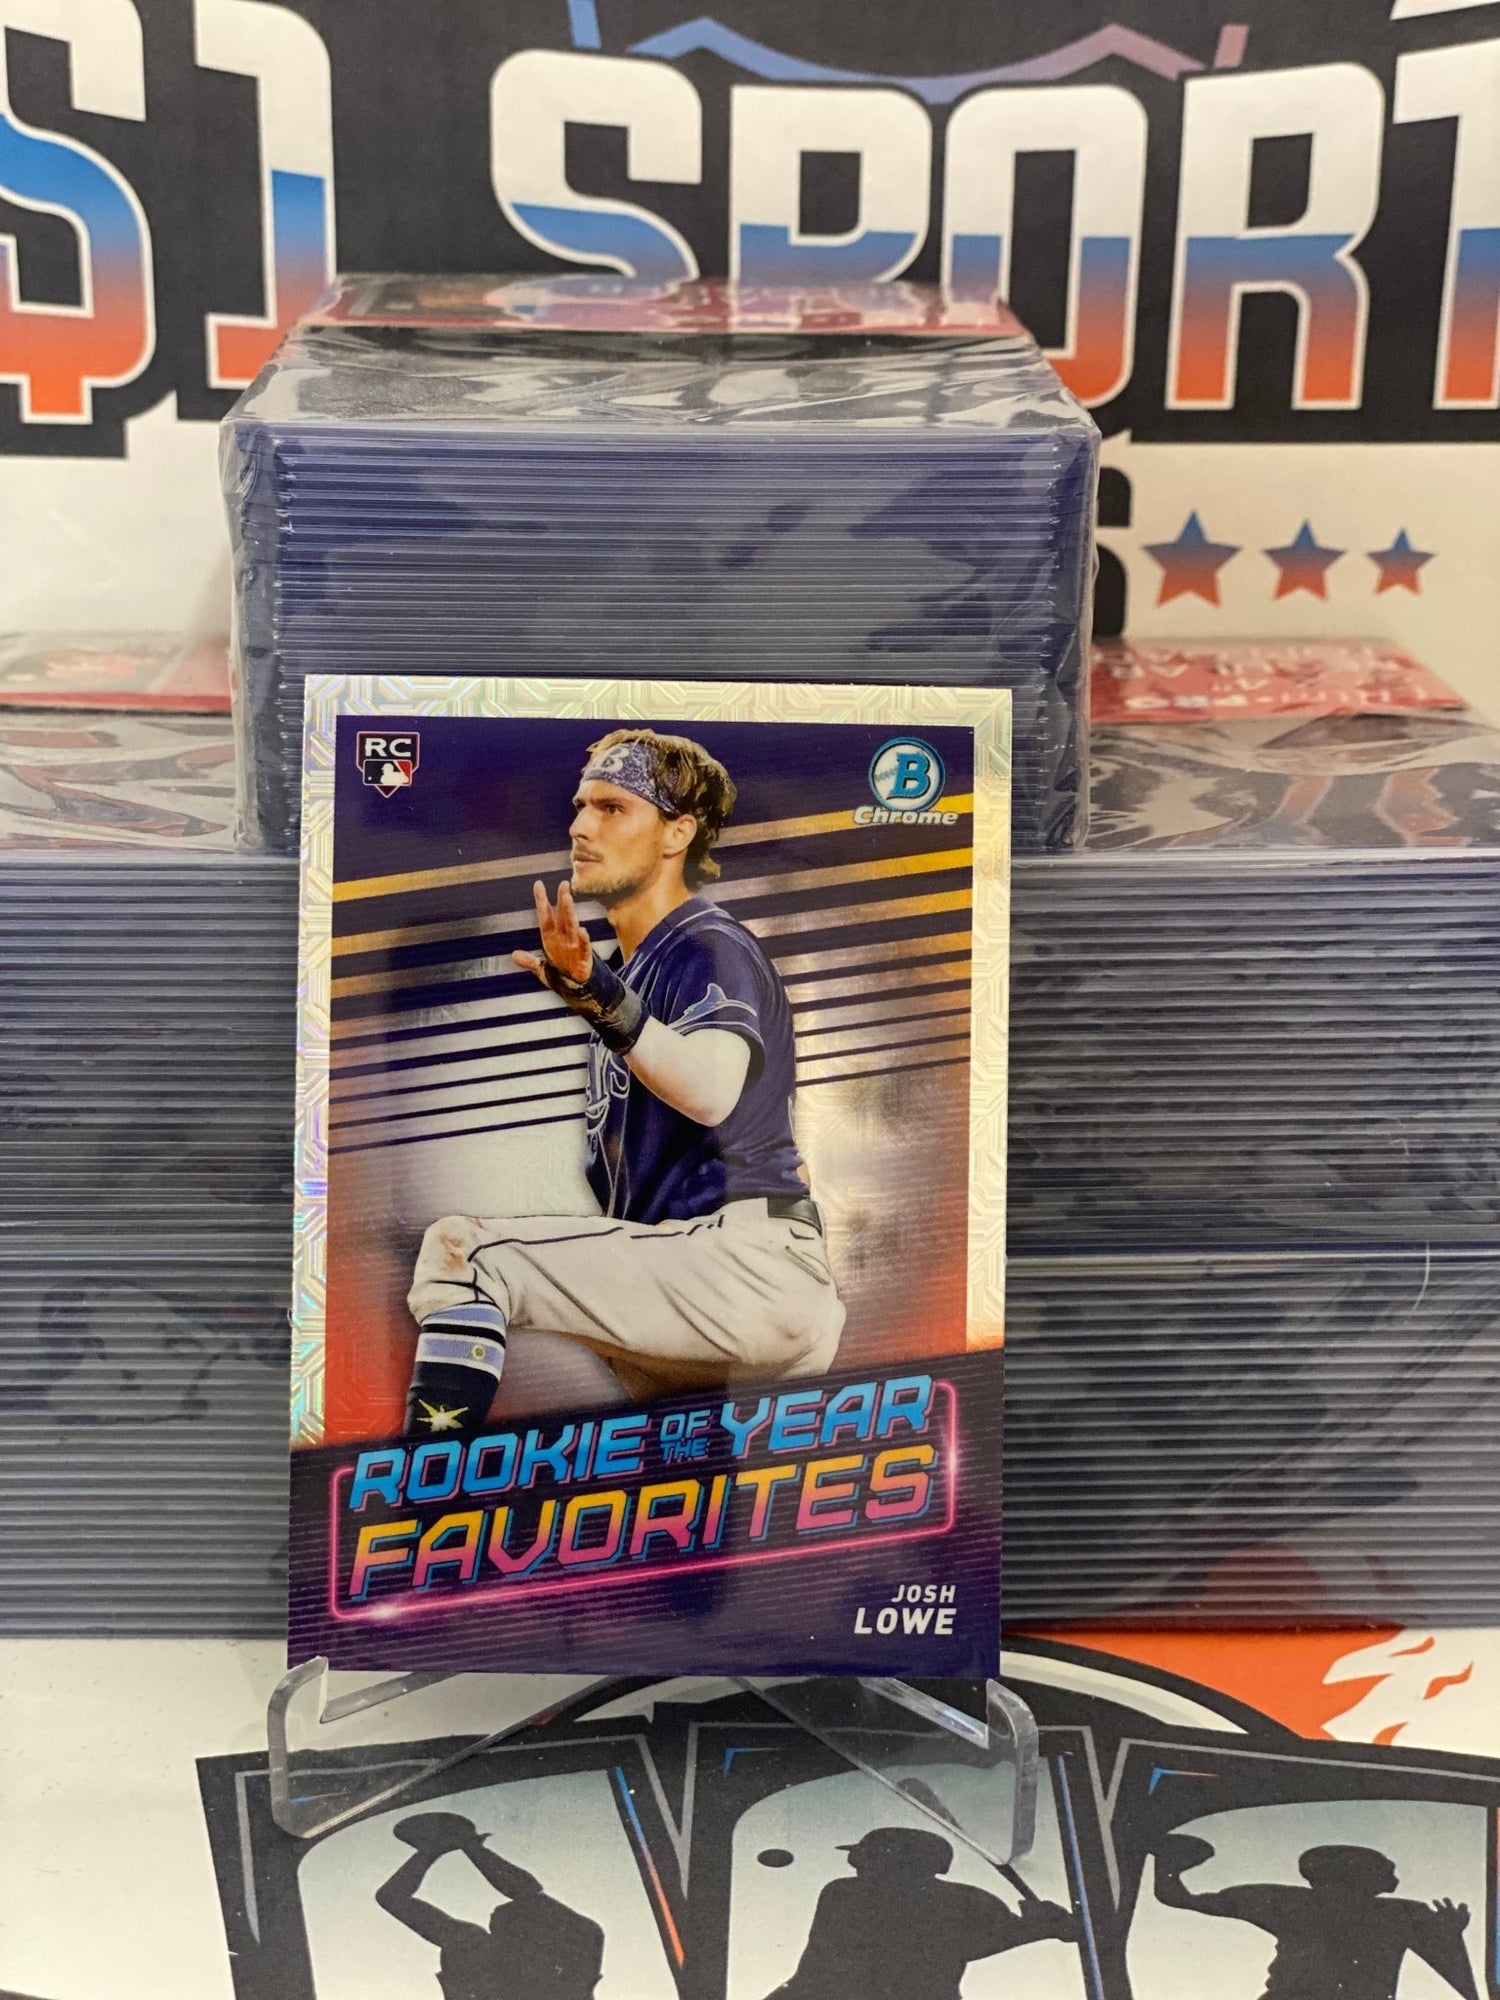 2022 Bowman Chrome (Mega Refractor, Rookie of the Year Favorites